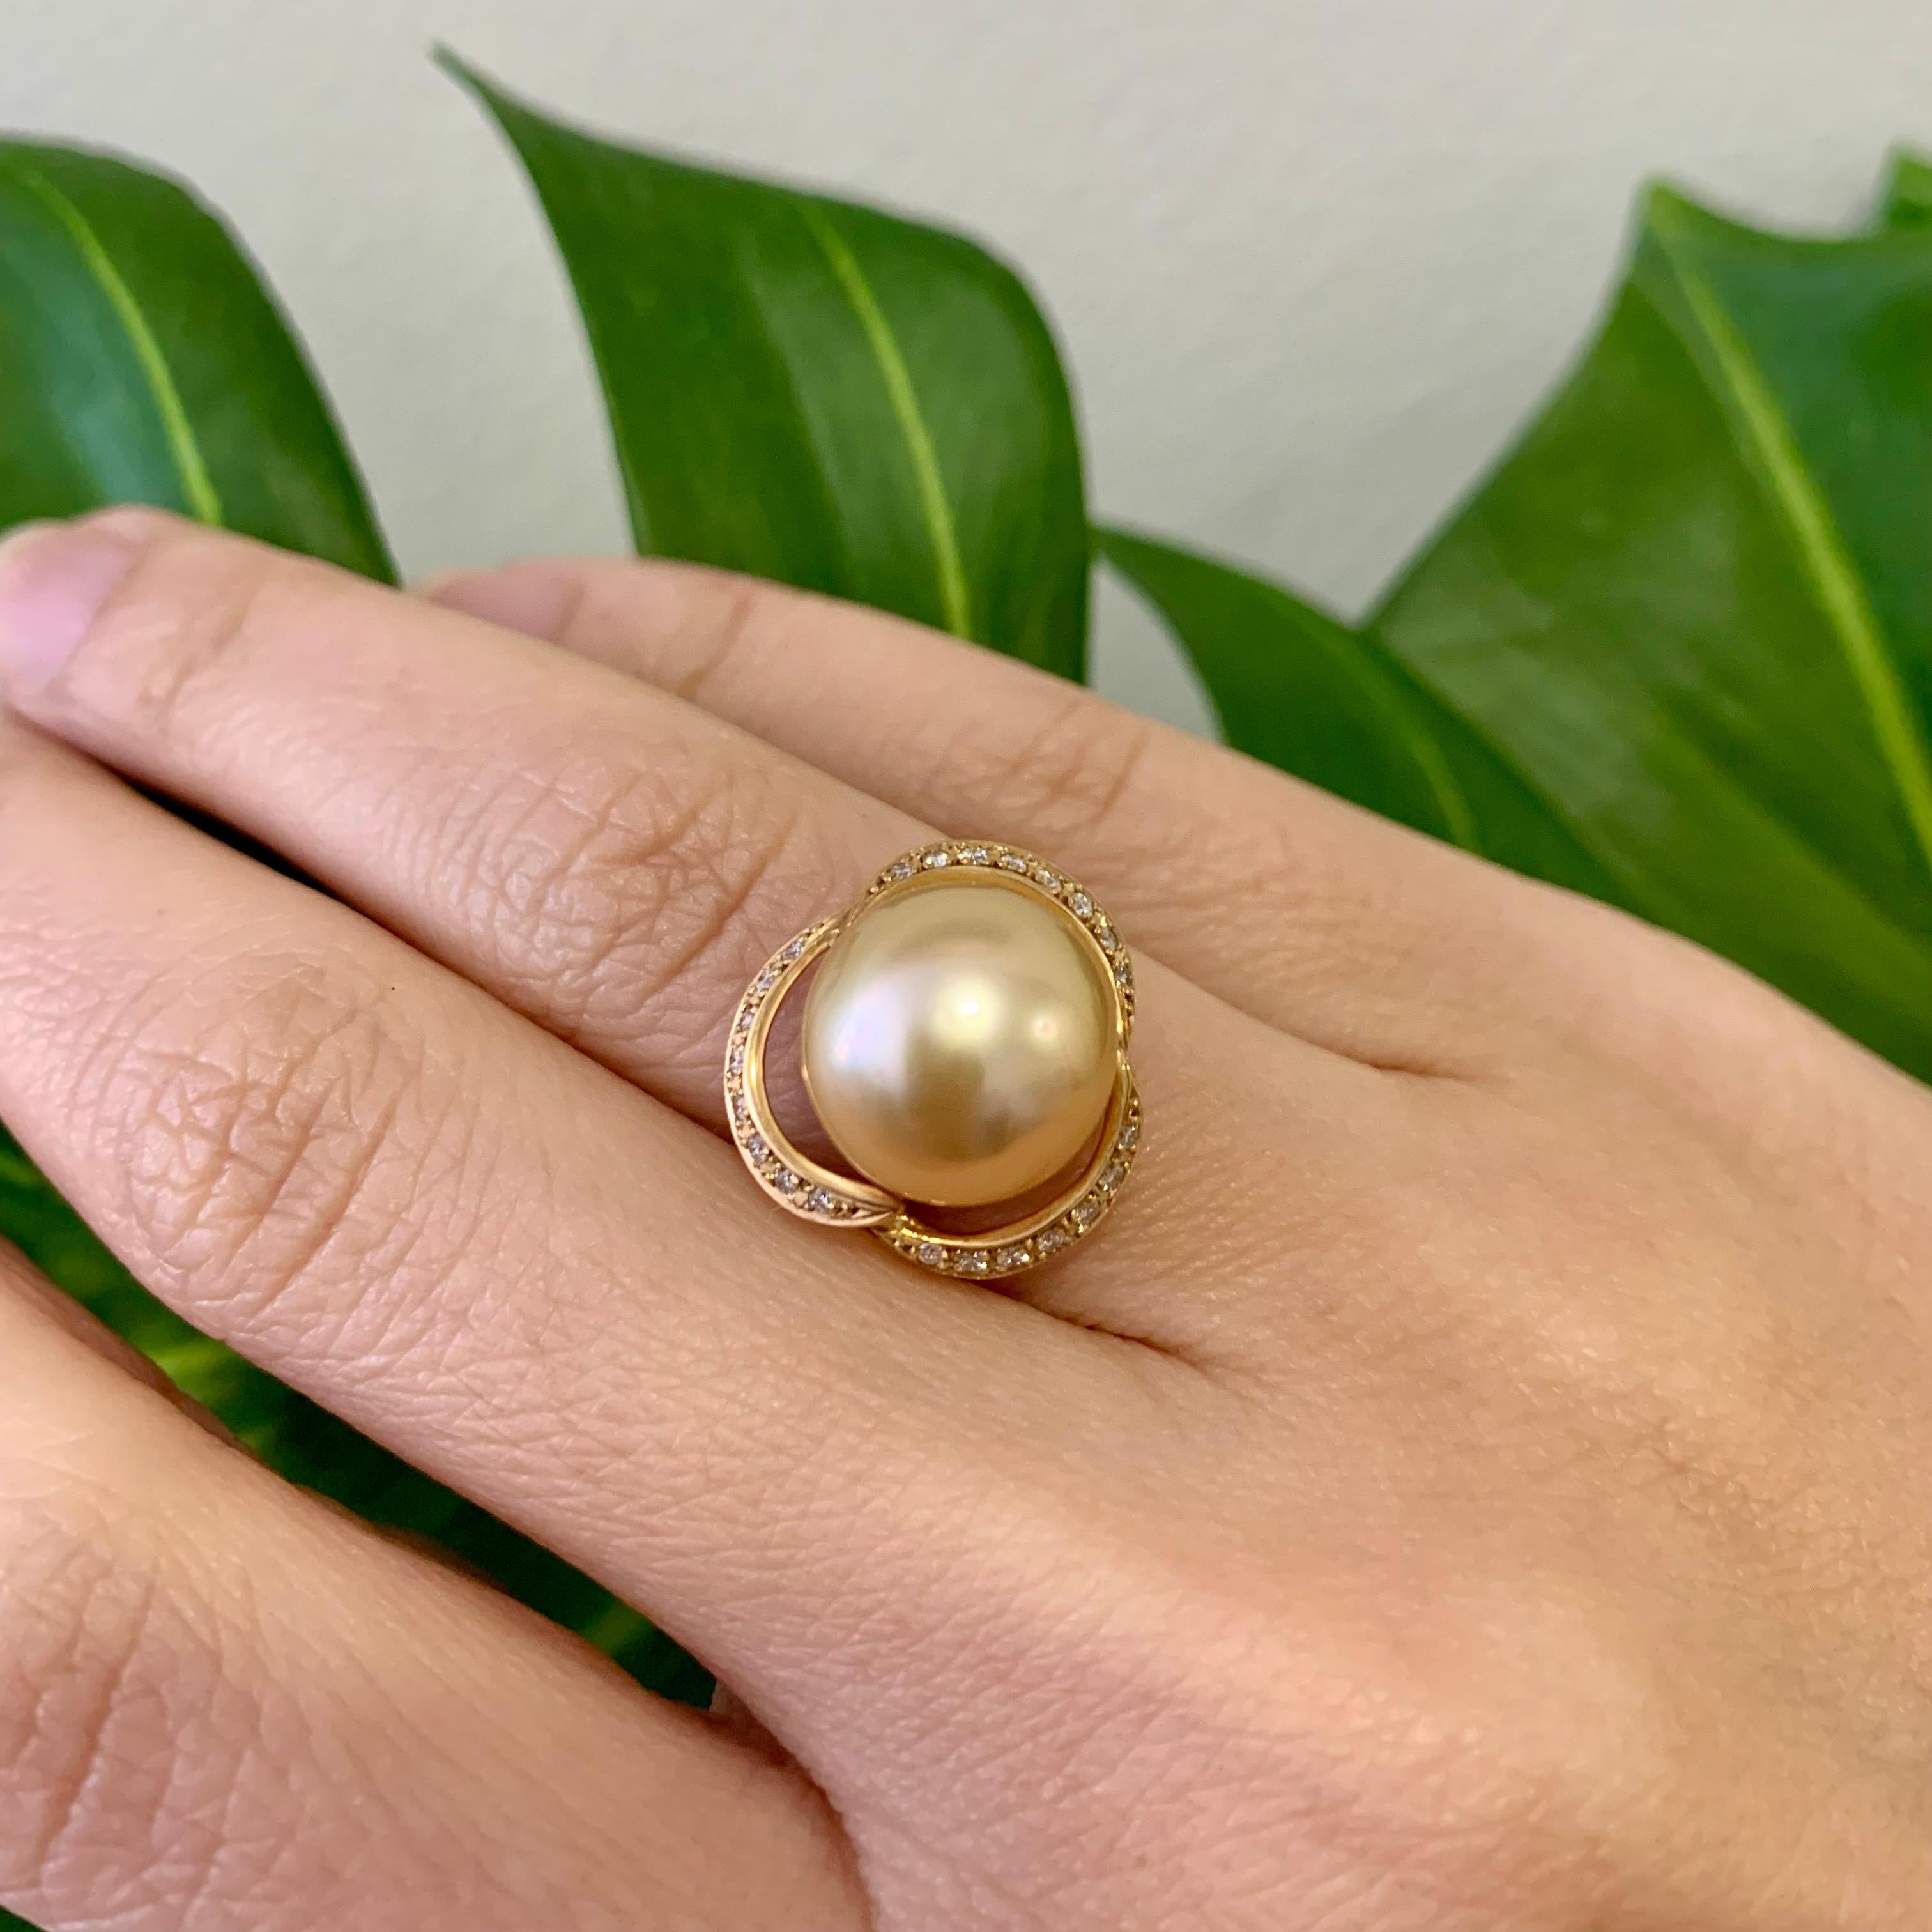 Gold South Sea Pearl Gold Diamond Ring, 'R55' For Sale 2